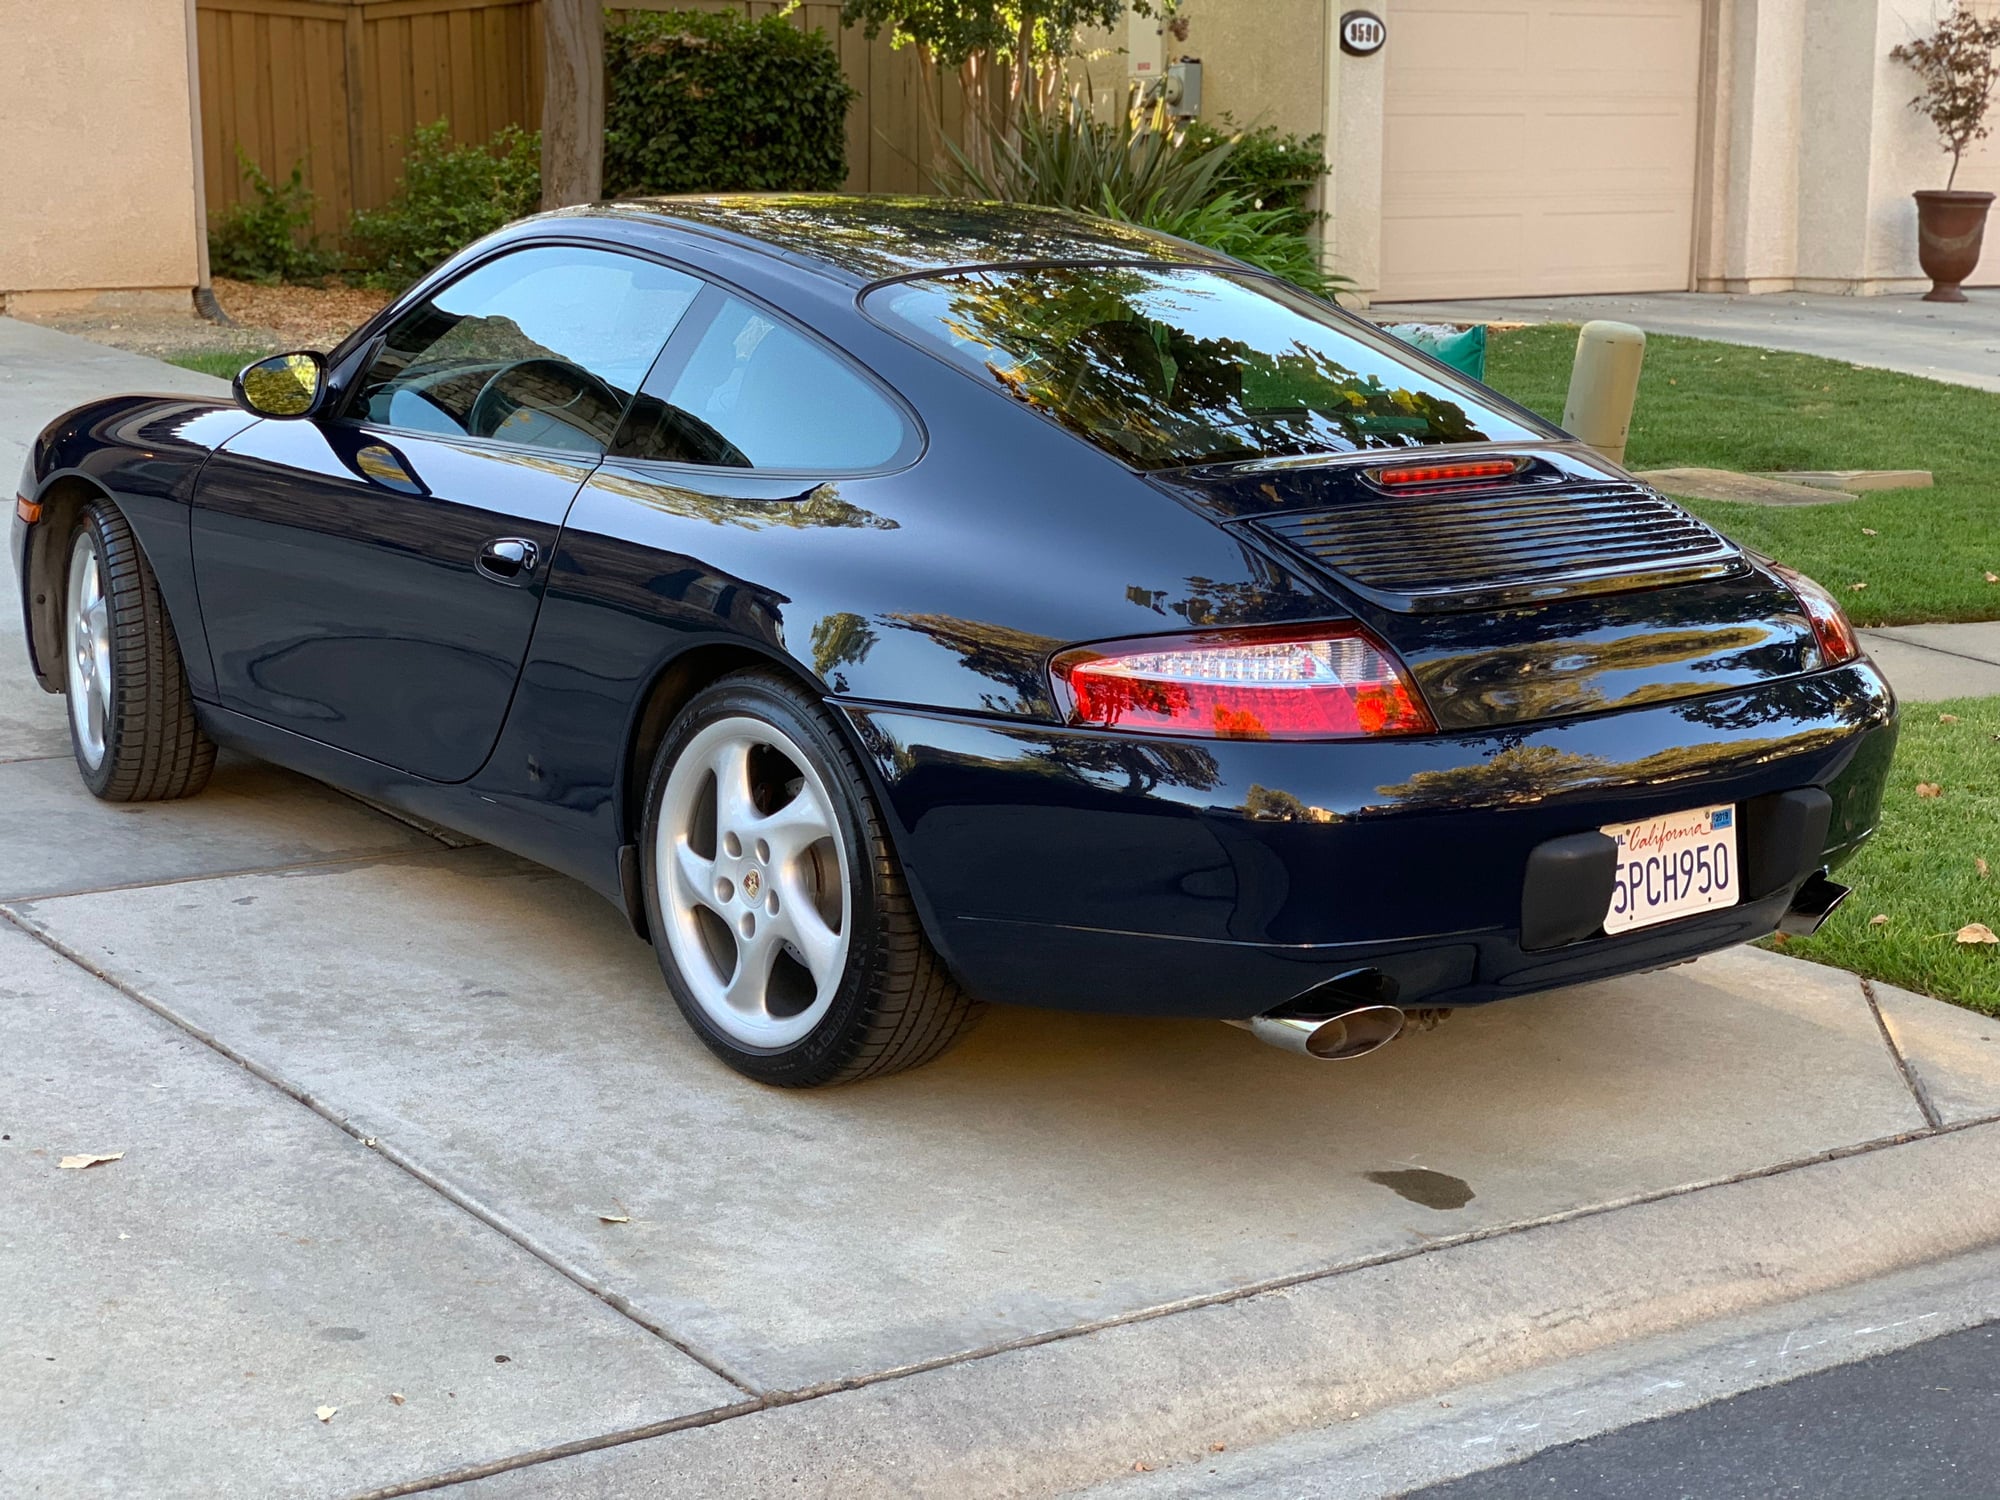 2001 Porsche 911 - 2001 Carrera 996 - Brand New Paint! - Used - VIN Wp0aa29941s621908 - 112,800 Miles - 6 cyl - 2WD - Manual - Coupe - Blue - Litchfield Park, AZ 85340, United States